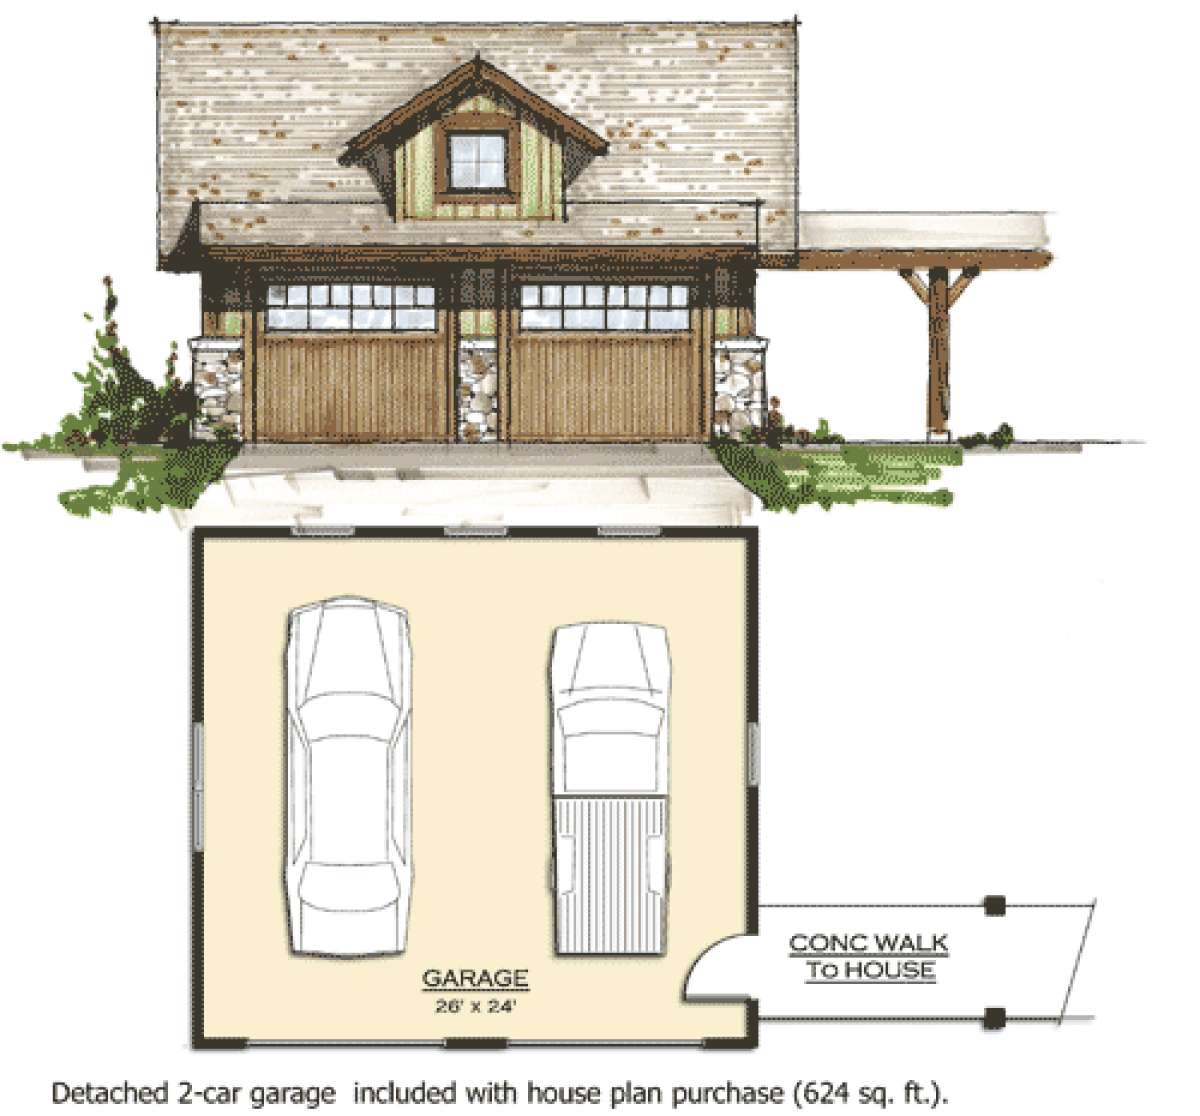 Garage for House Plan #8504-00067